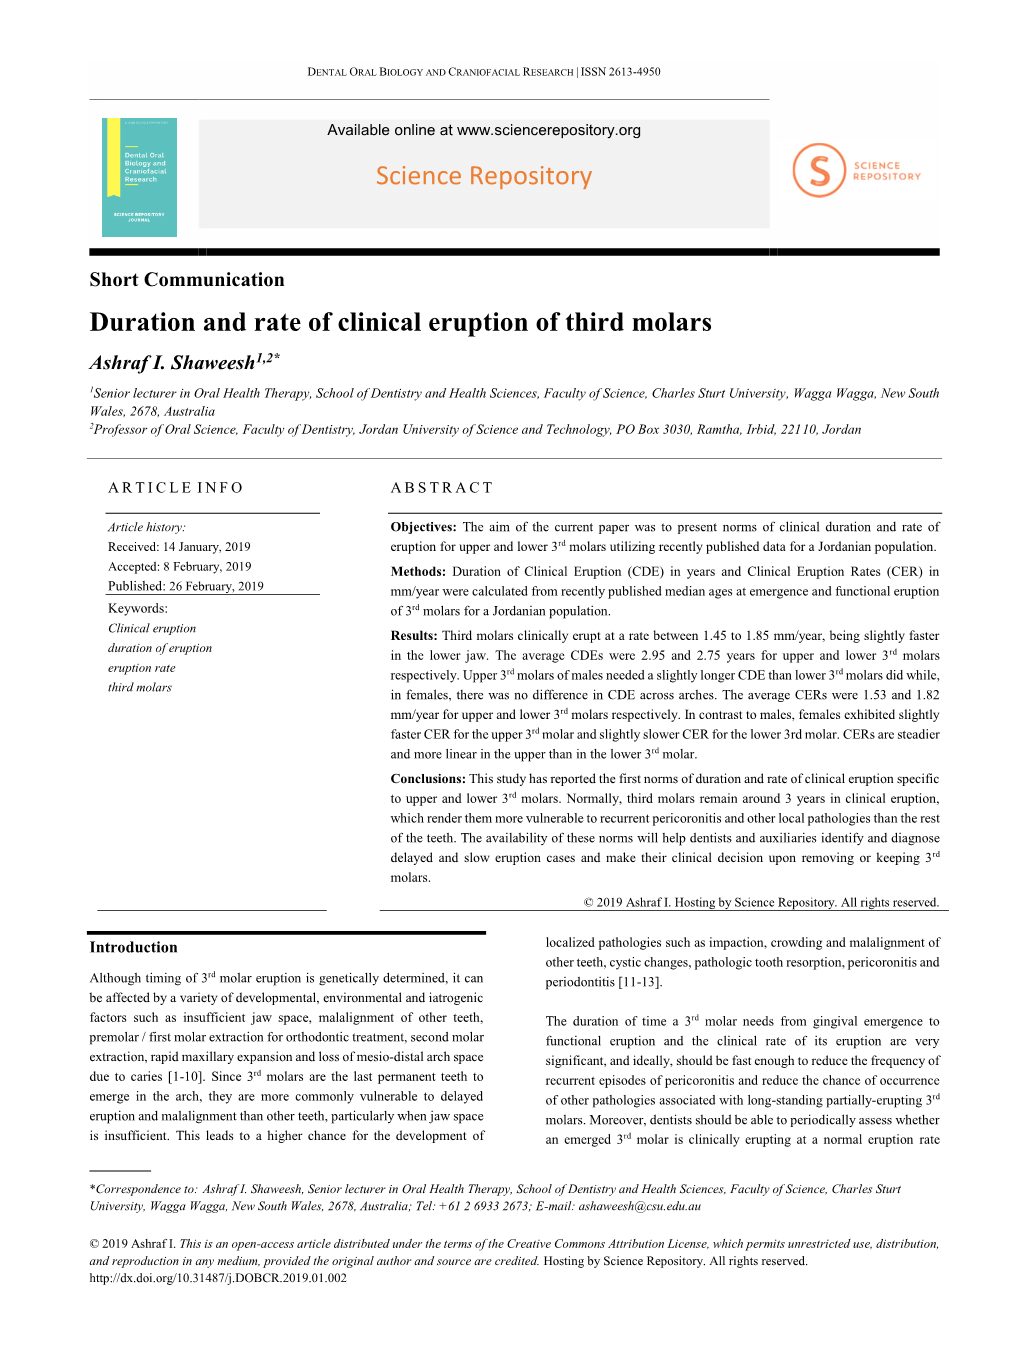 Duration and Rate of Clinical Eruption of Third Molars Ashraf I